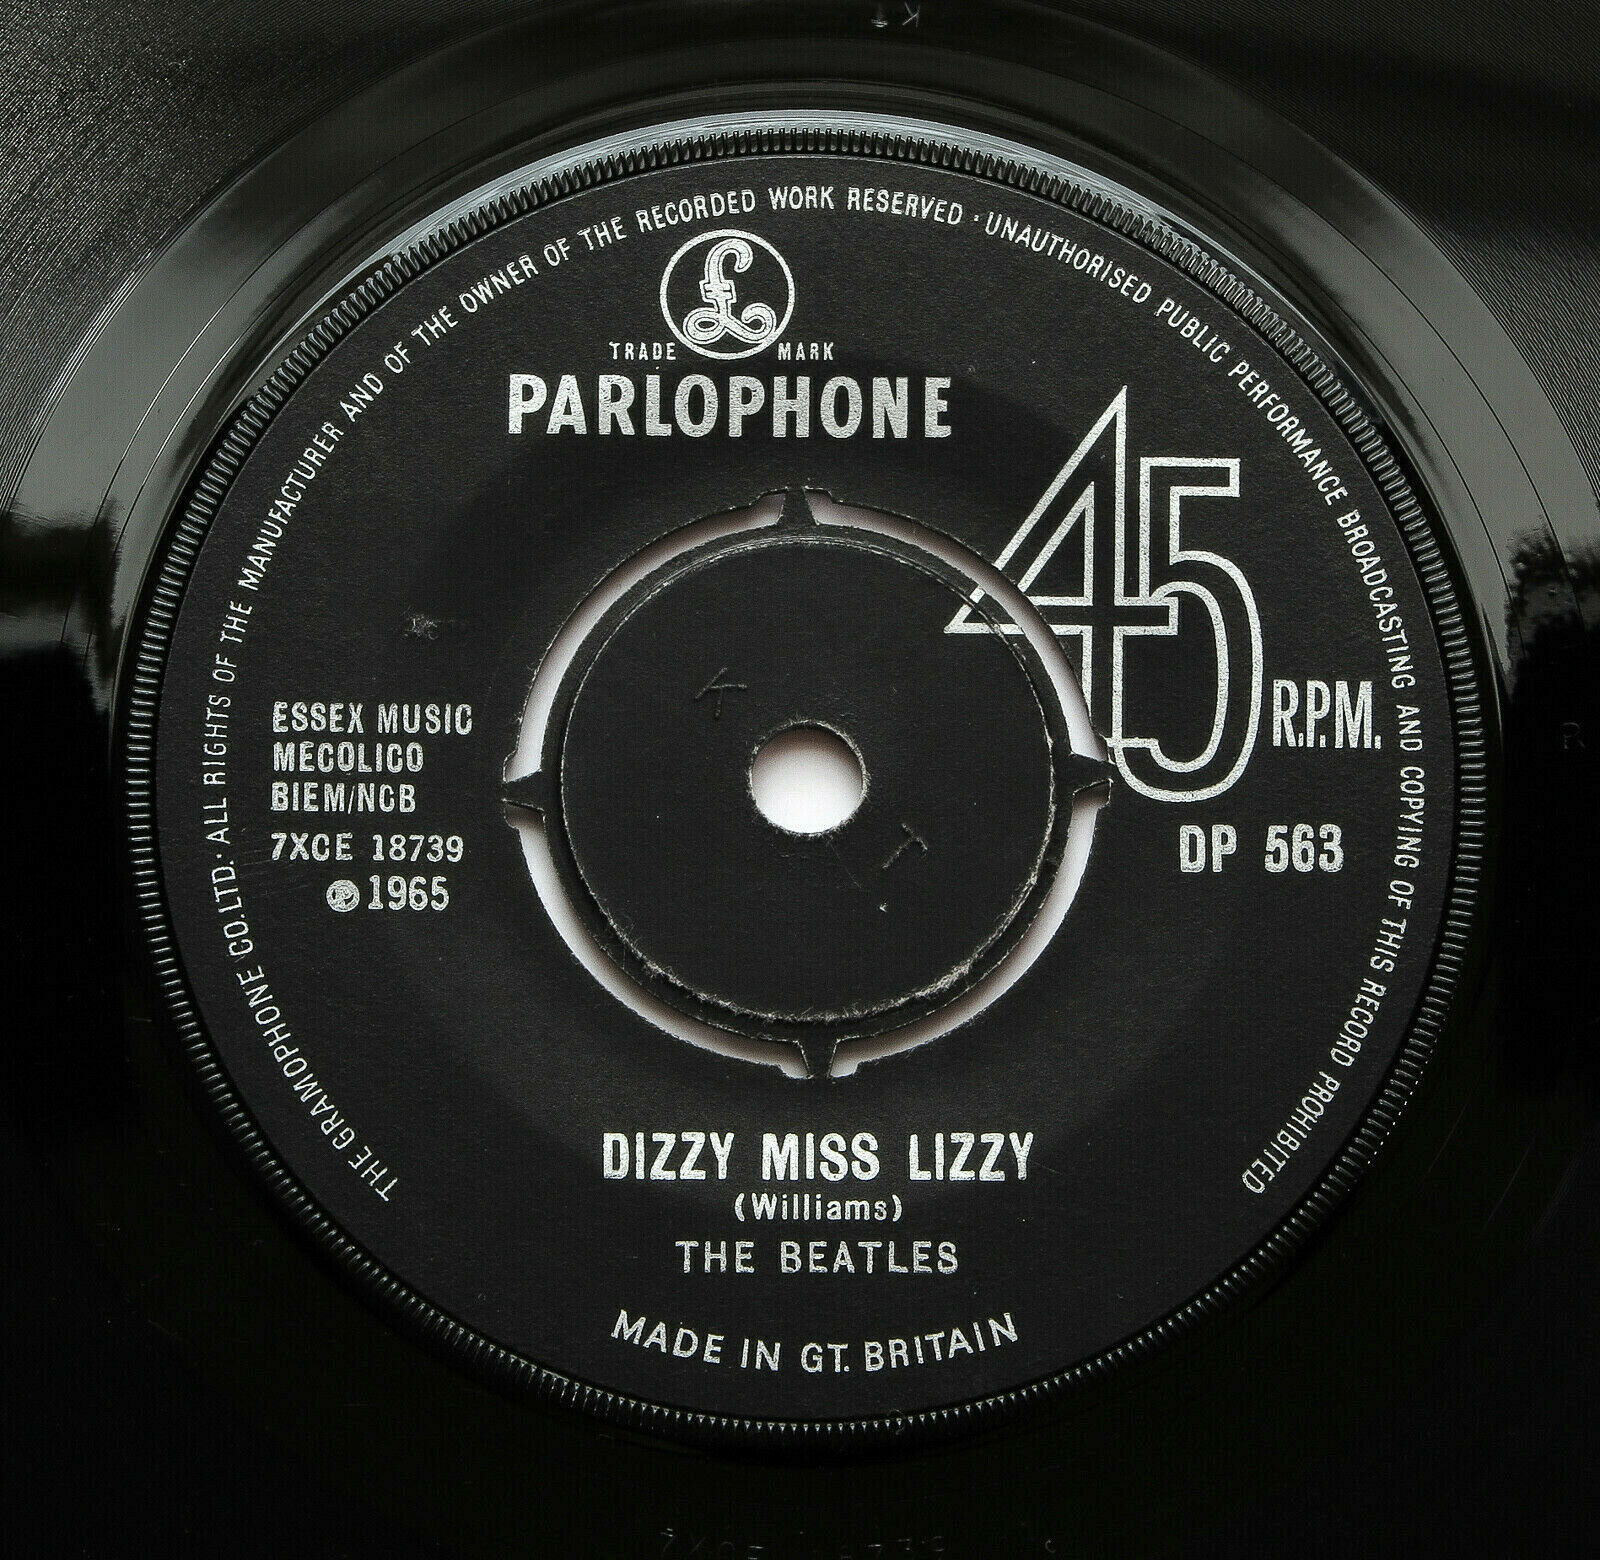 Pic 3 The Beatles - Yesterday/Dizzy Miss Lizzy - UK 1965 *EXPORT* Parl. 45 DP 563 EX+